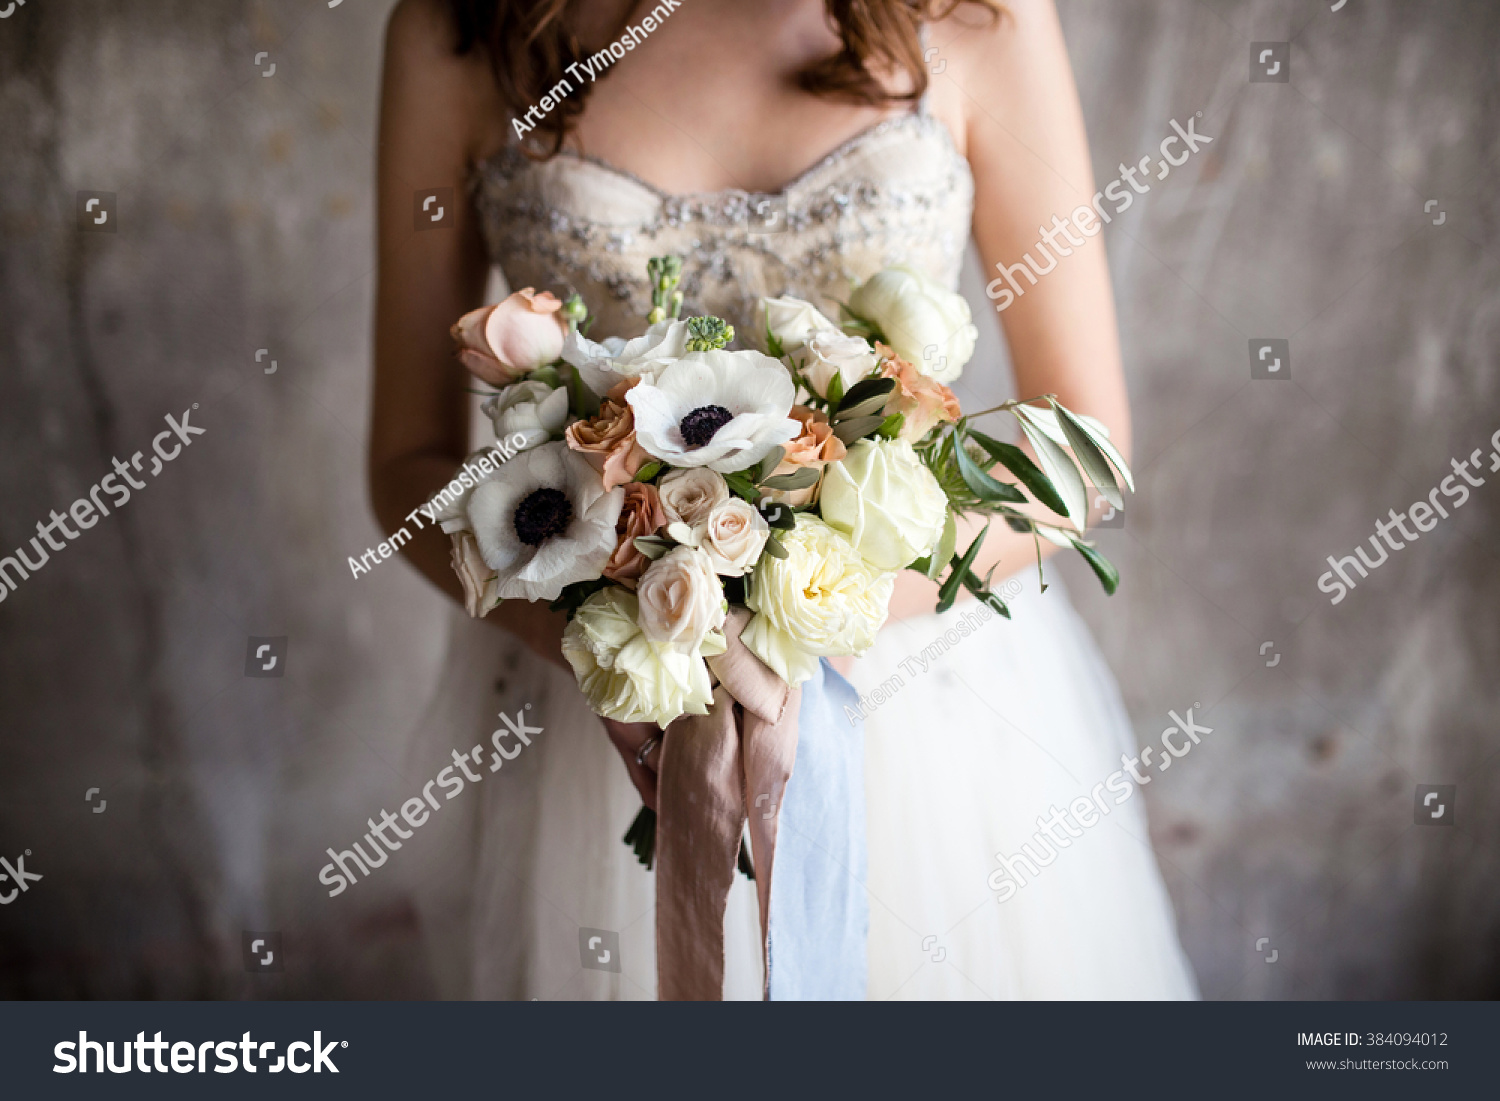 a bouquet of anemones in the hands of the bride against the background of textured walls #384094012